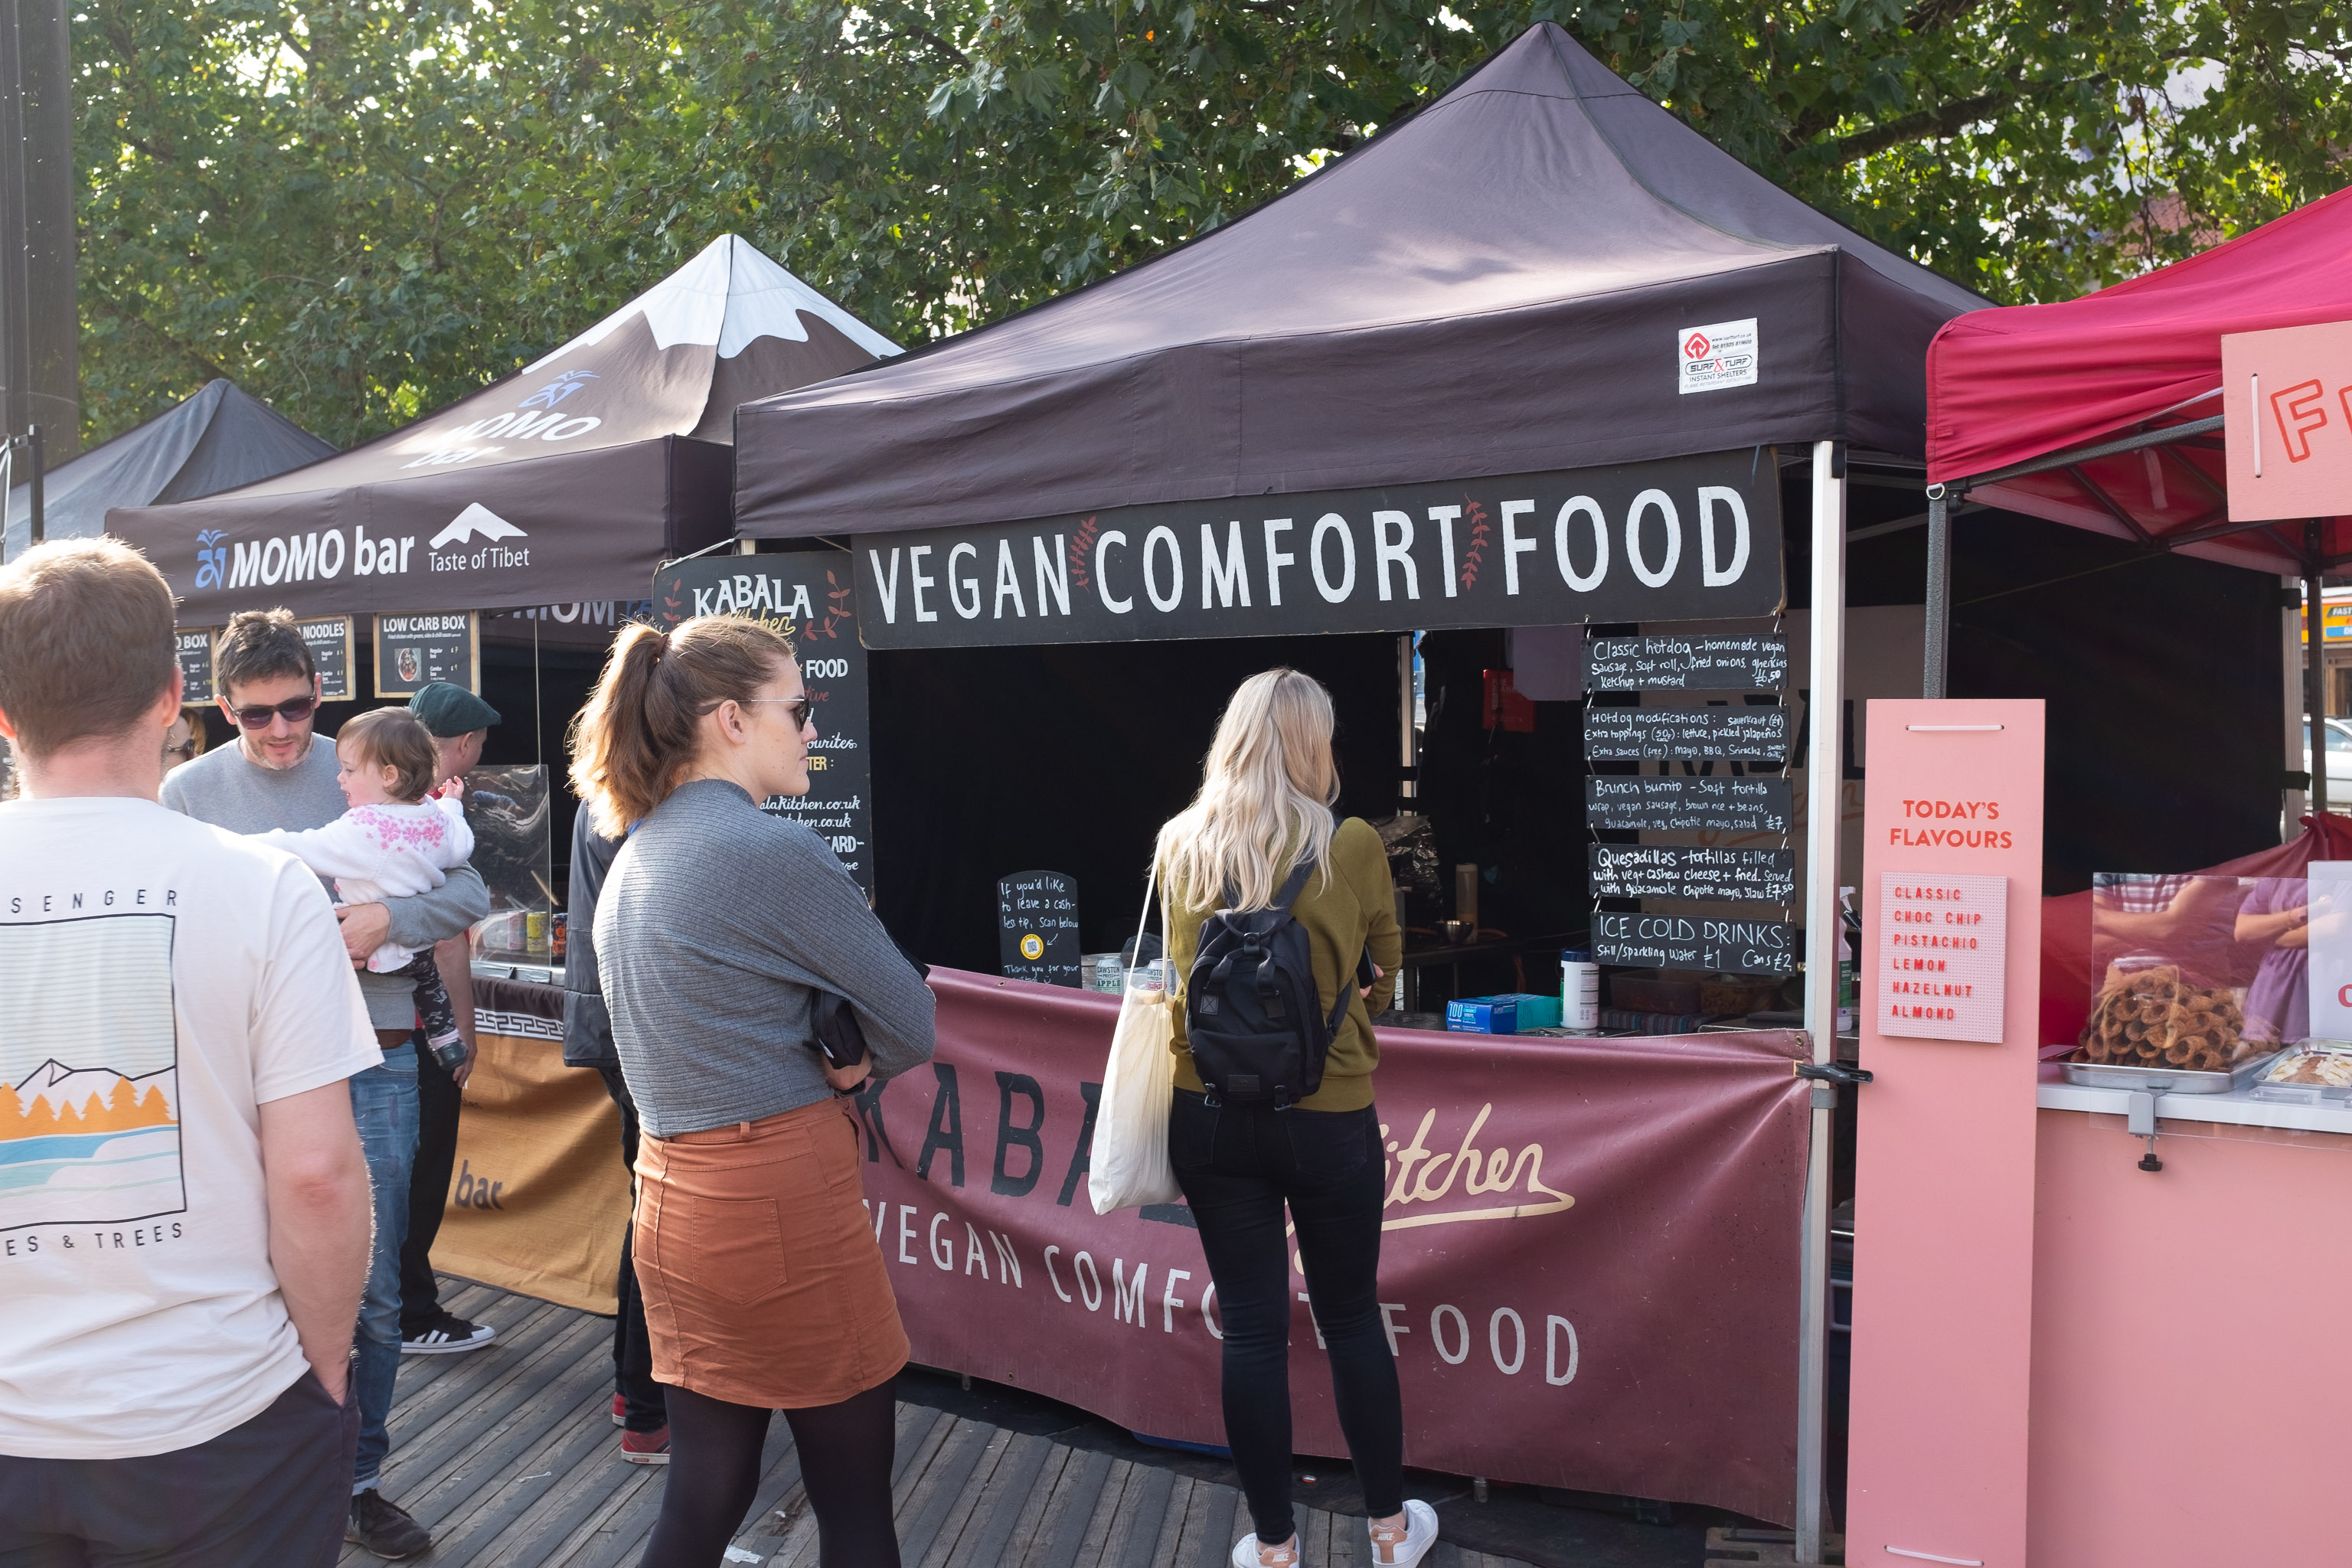 Vegan Comfort
The food market on the Centre was very busy.
